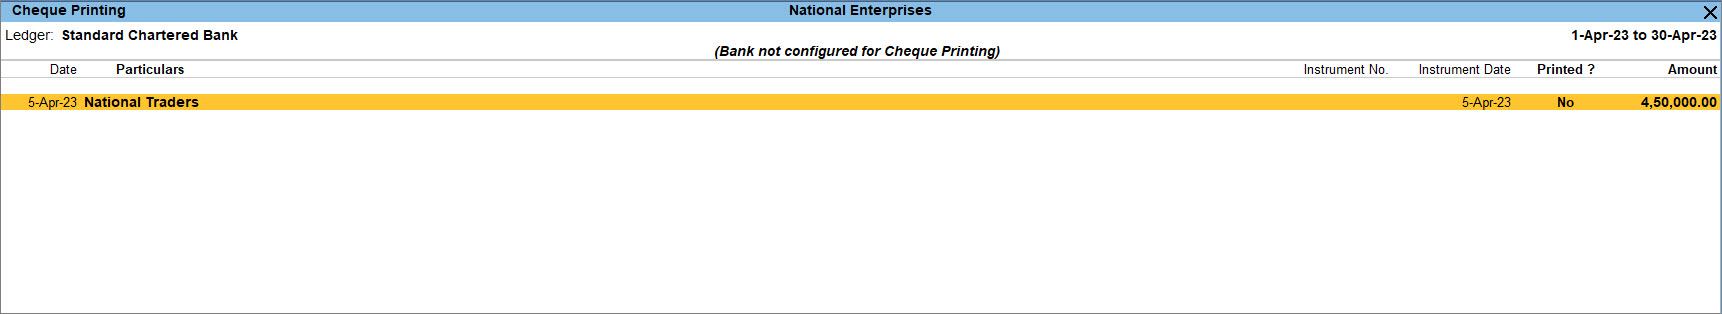 Bank not configured for cheque printing